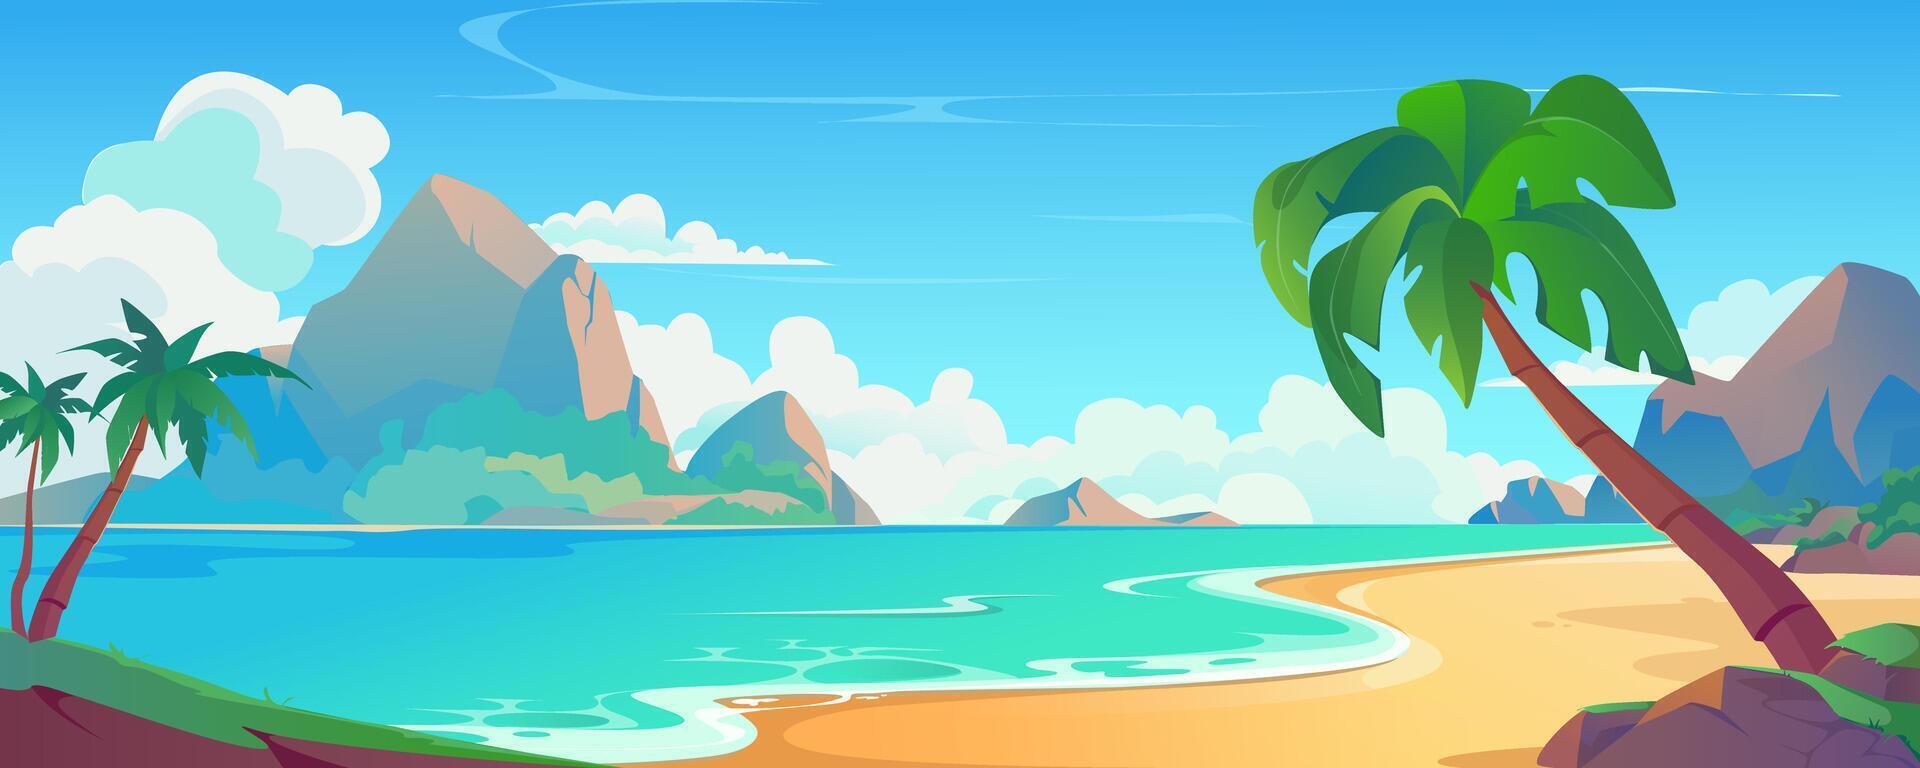 Sea beach background banner in cartoon design. Tropical sand lagoon landscape with palm trees, mountain rocks with day clouds, ocean waves. Summertime seaside idyllic view. cartoon illustration vector